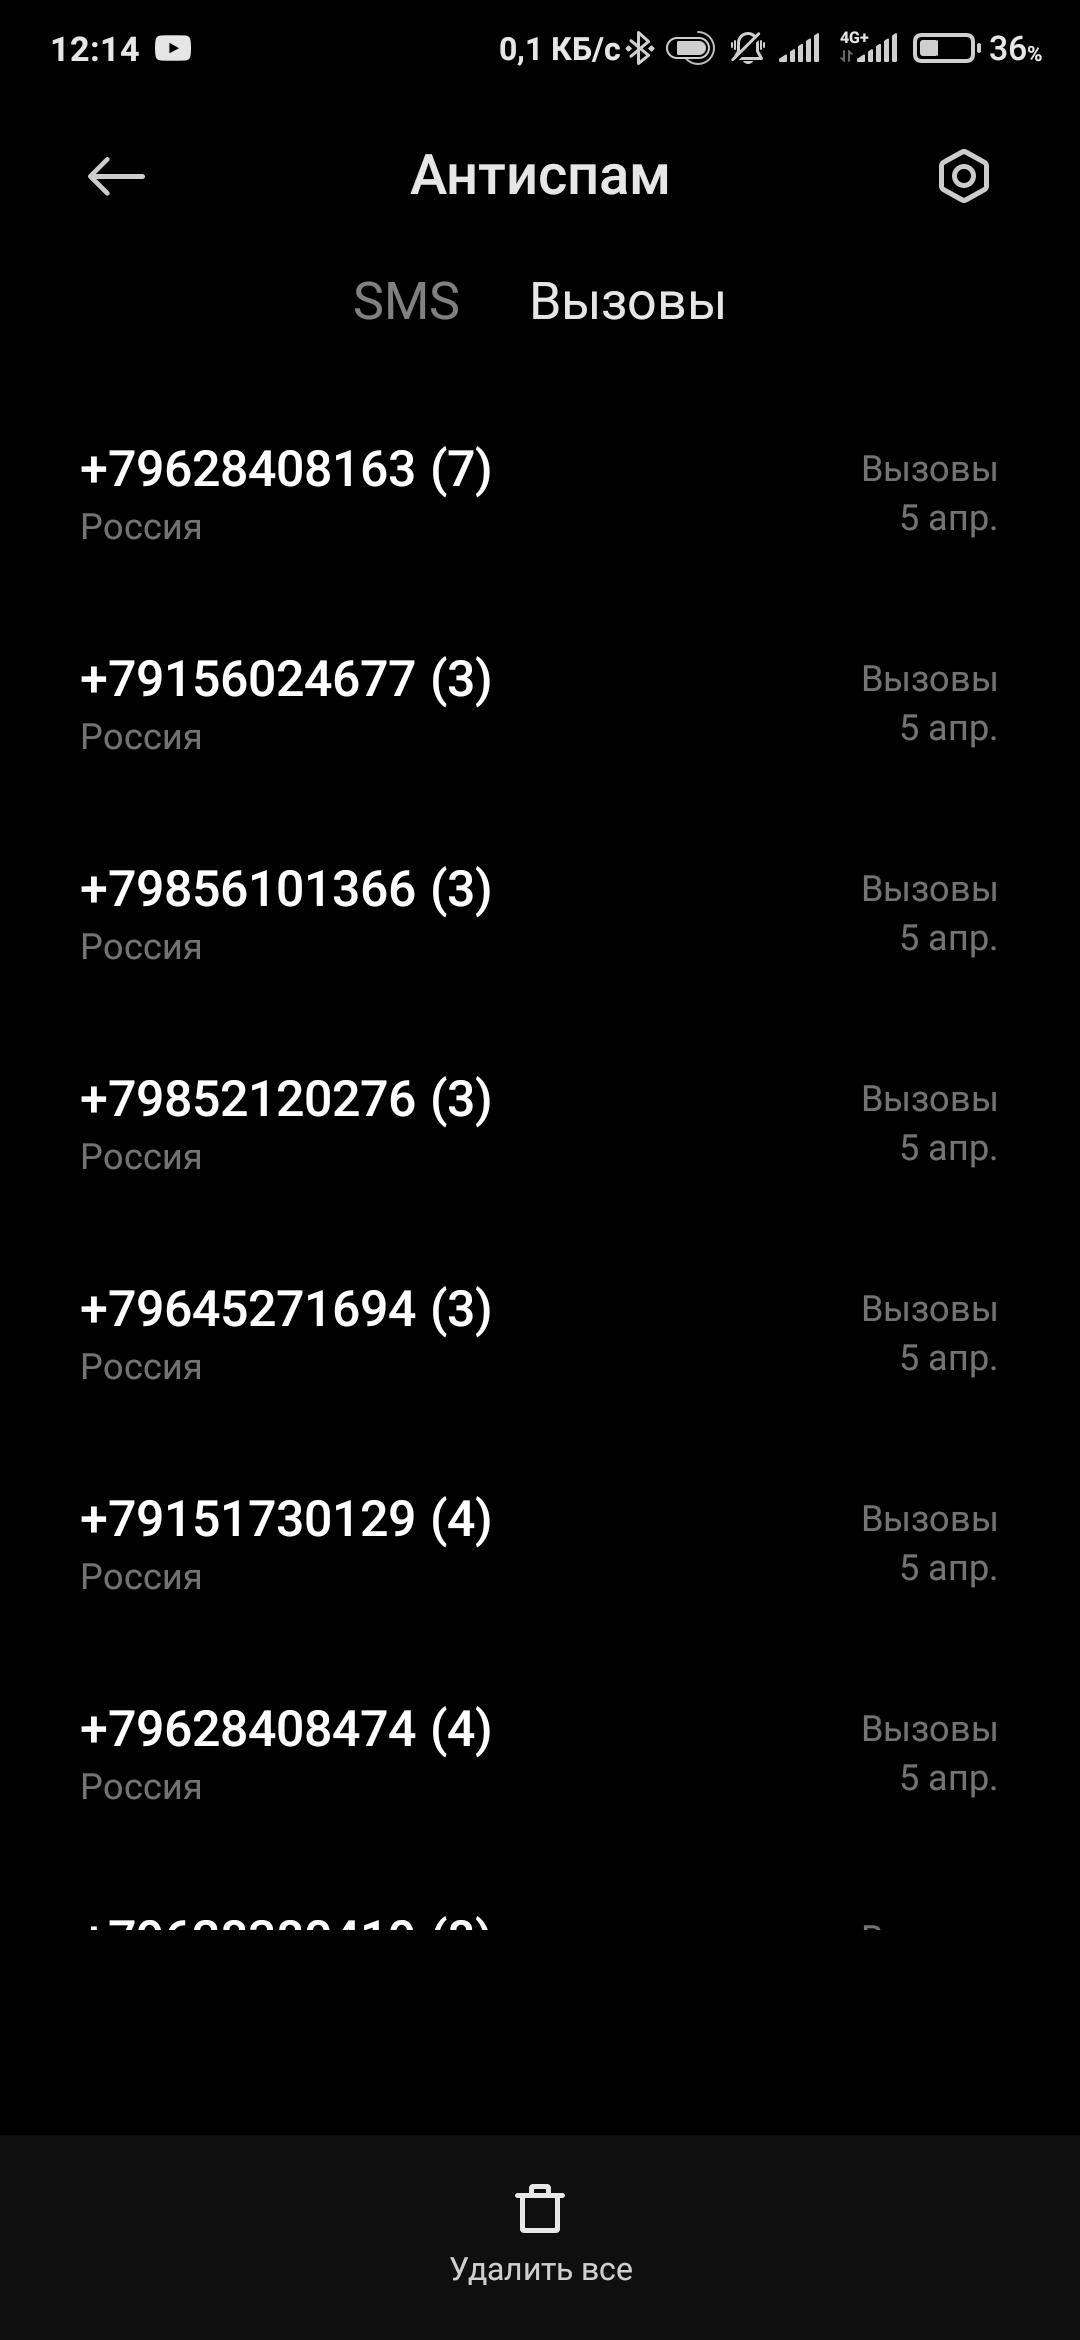 Good morning, 20 spam calls to your collar - My, Infuriates, Indignation, Tired of, Bank, Spam, Spam calls, Sovcombank, Halva Map, Morning in a pine forest, Morning is never good, Mat, Cry from the heart, Crying Yaroslavna, Нытье, Longpost, Negative